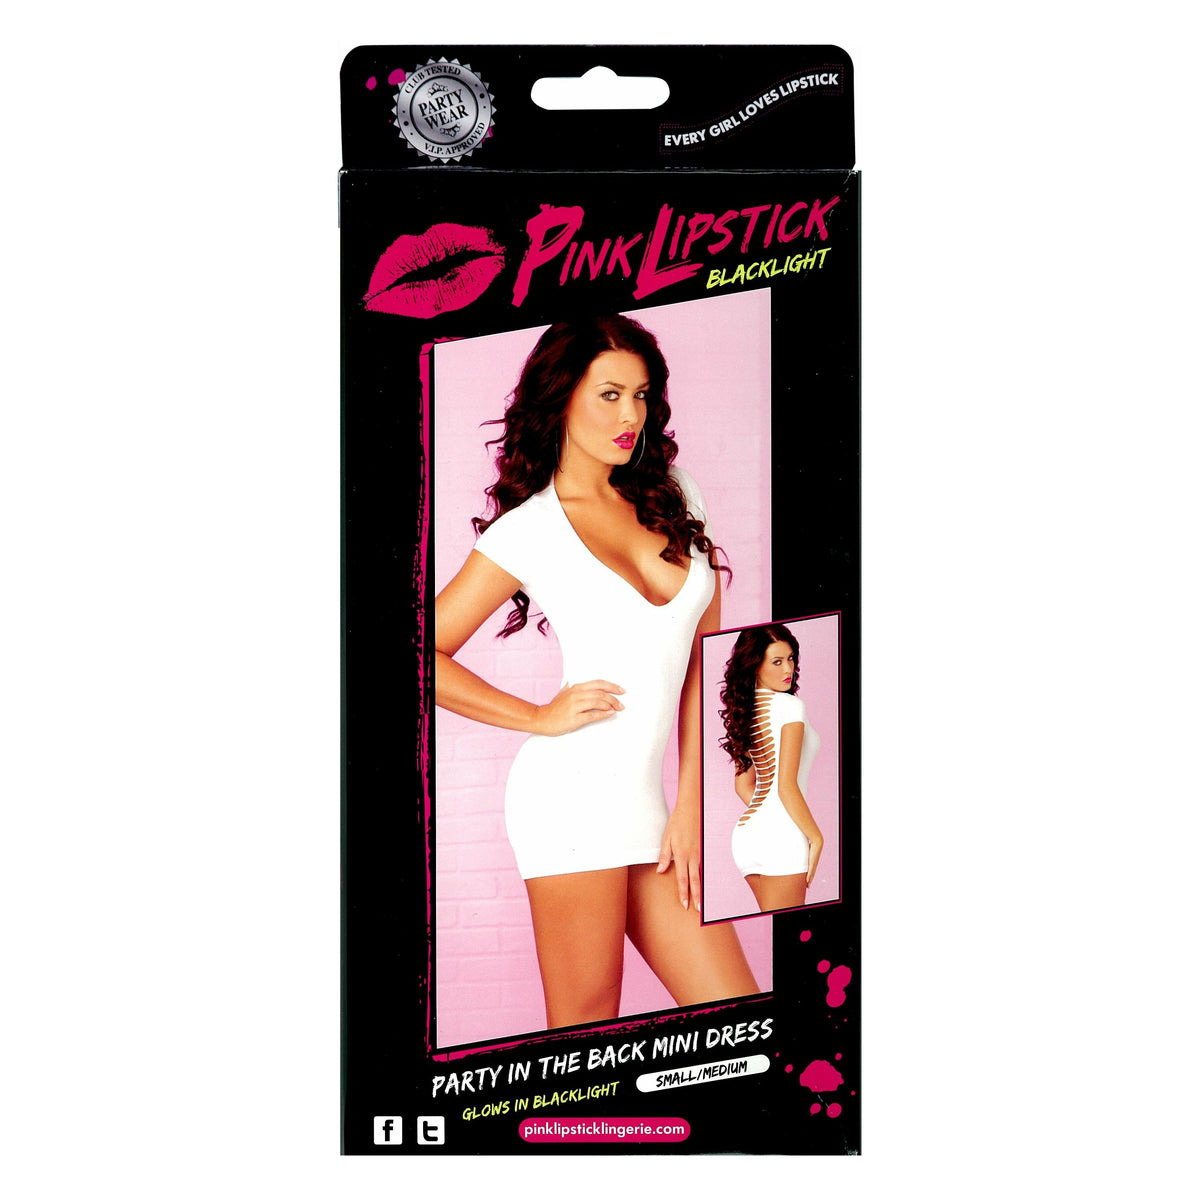 Pink Lipstick Party In The Back Mini Dress - White - S/M